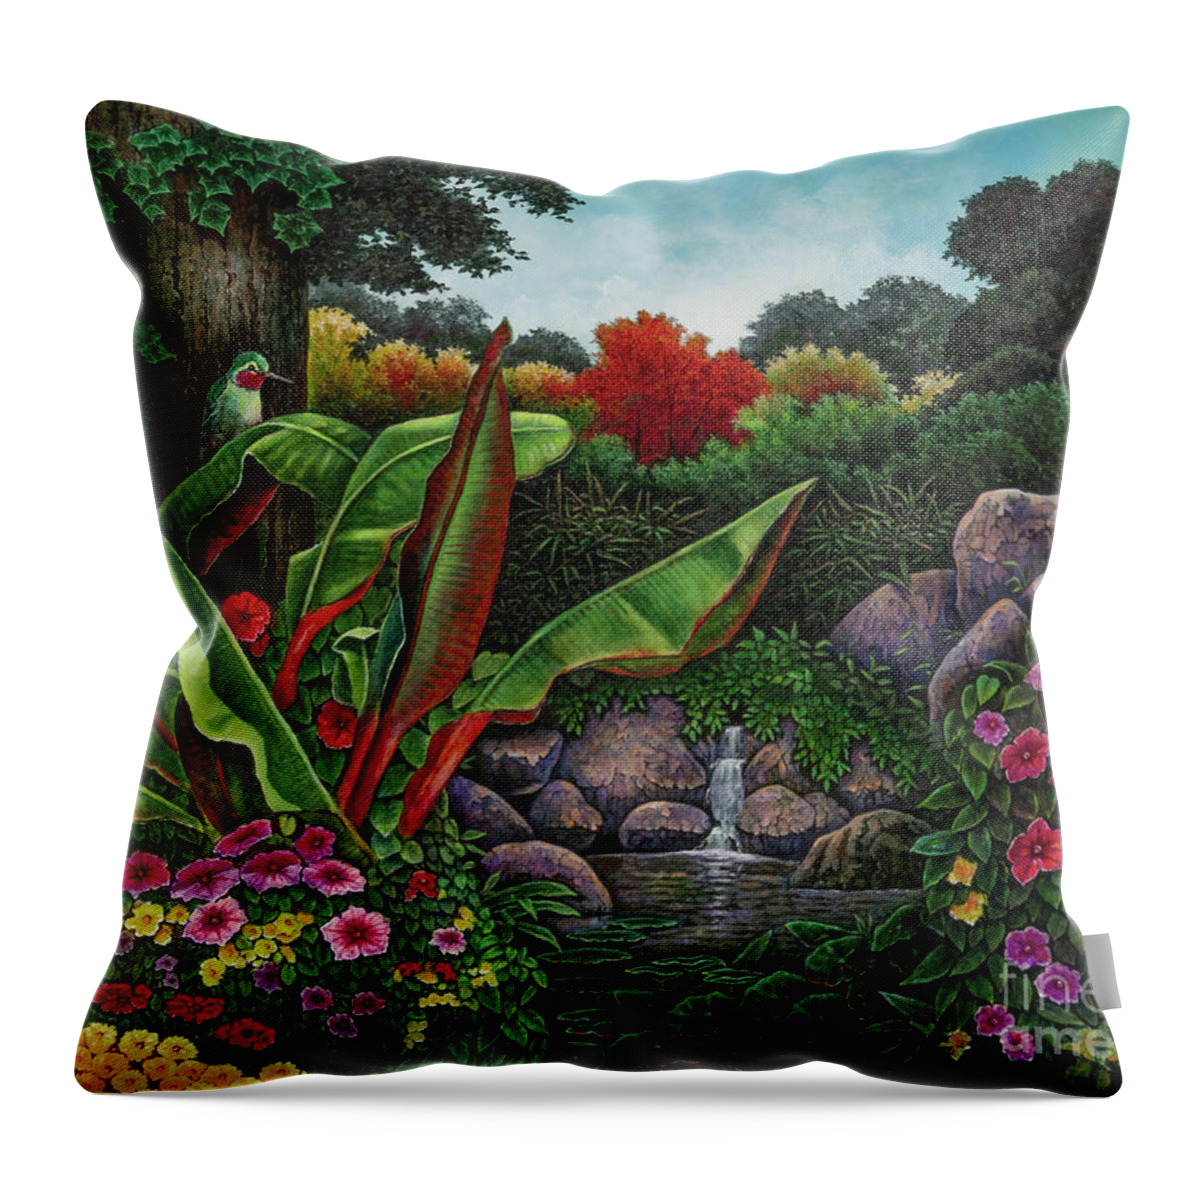 Humming Bird Throw Pillow featuring the painting Meadow Brook by Michael Frank